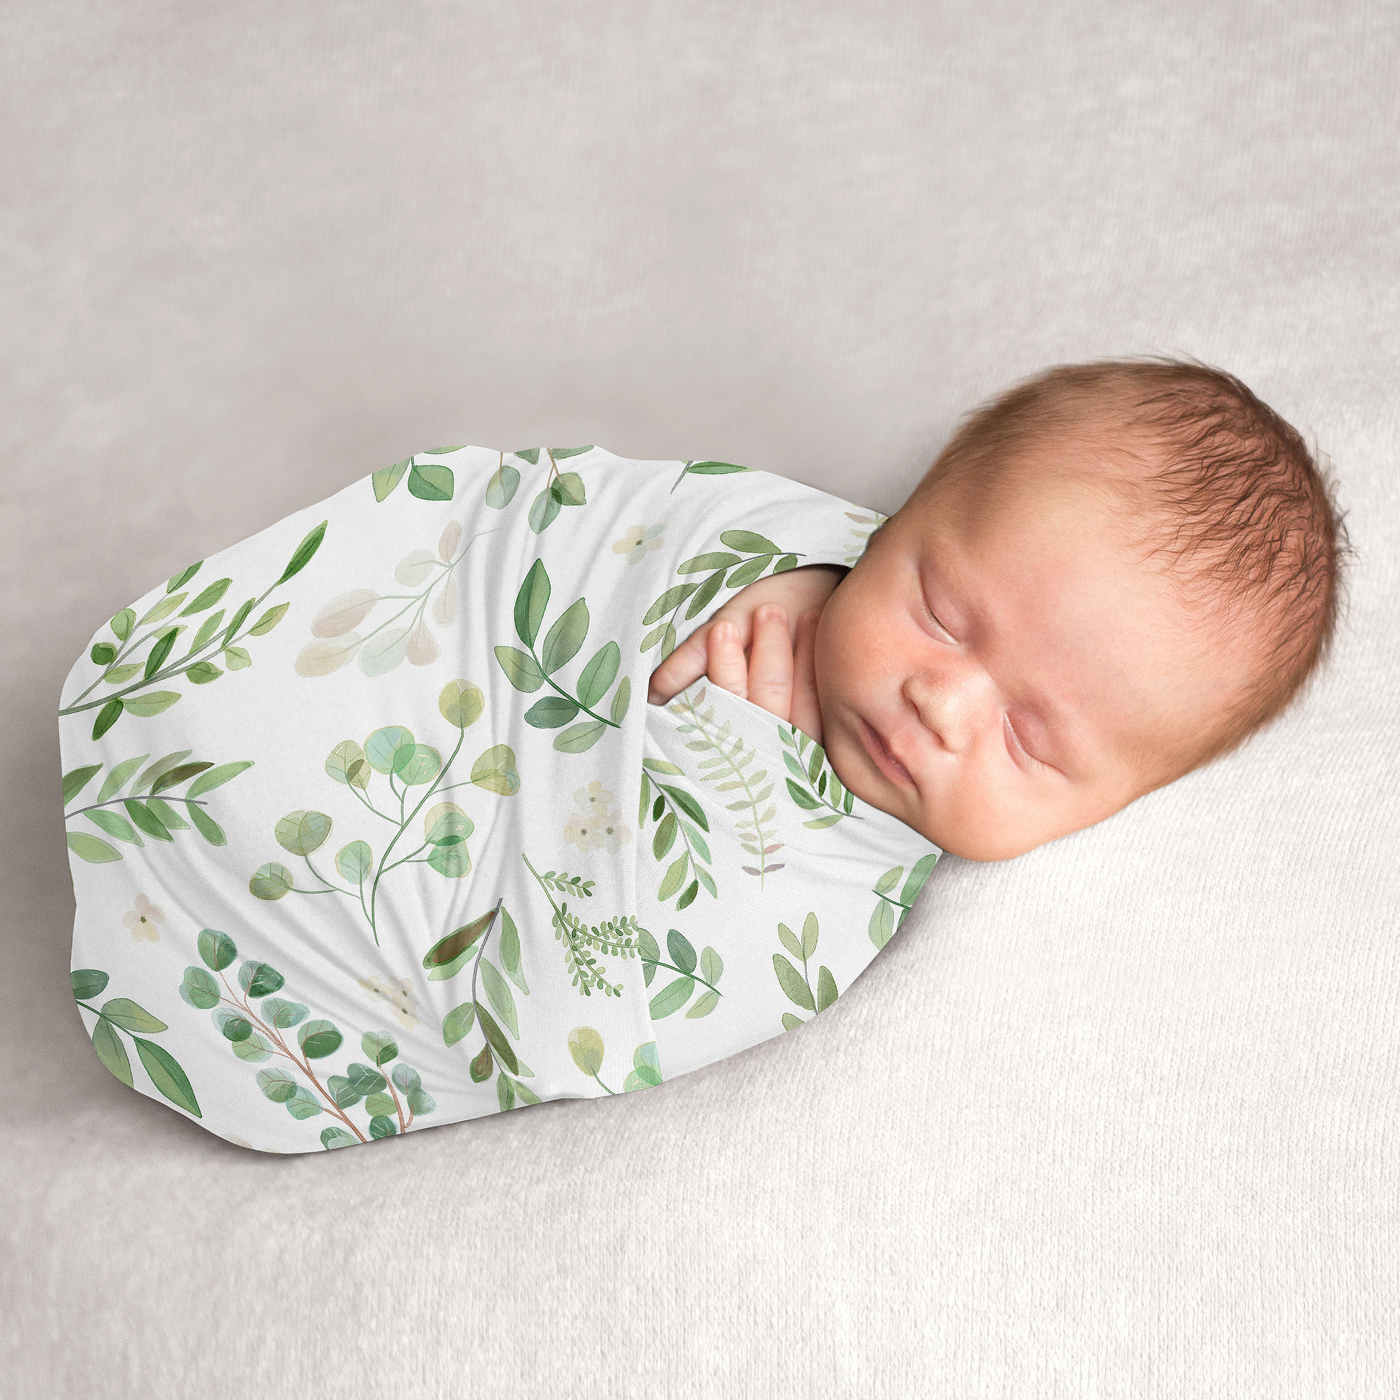 What Is A Swaddling Blanket